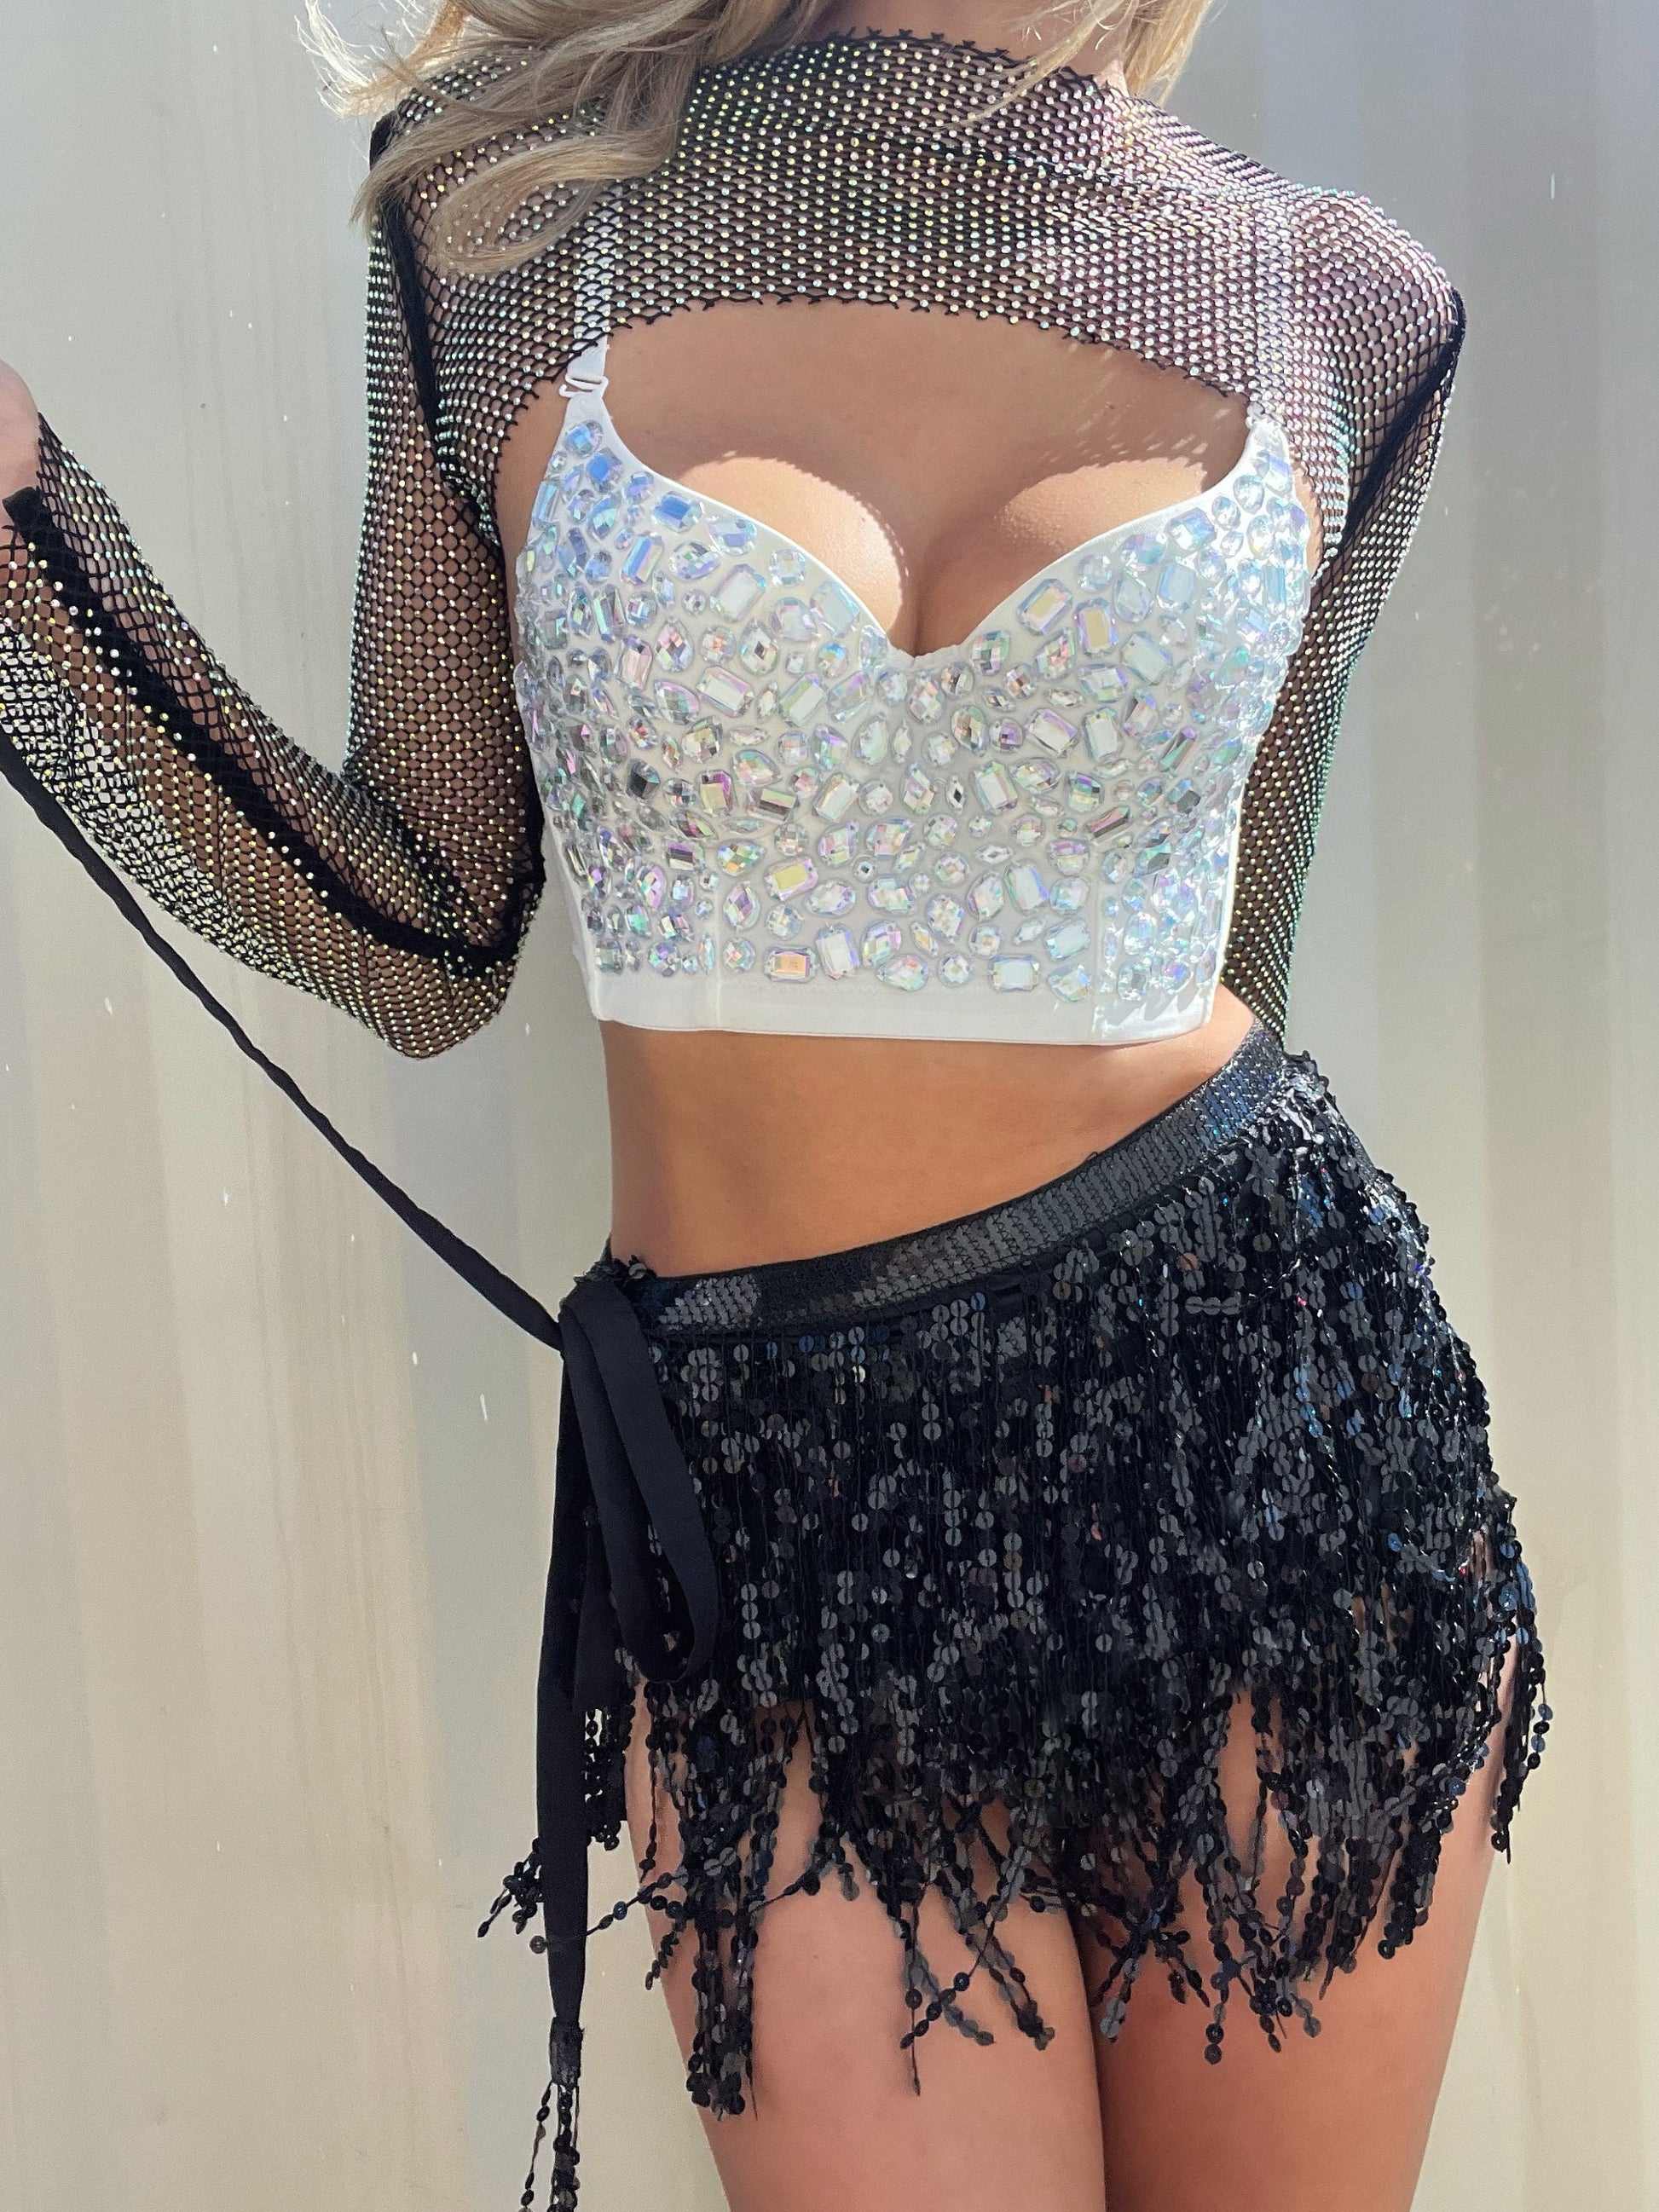 Rave outfit Bustier Top Crystal Gemstone festival clothing bridal bachelorette party corset top rave clothing disco outfit